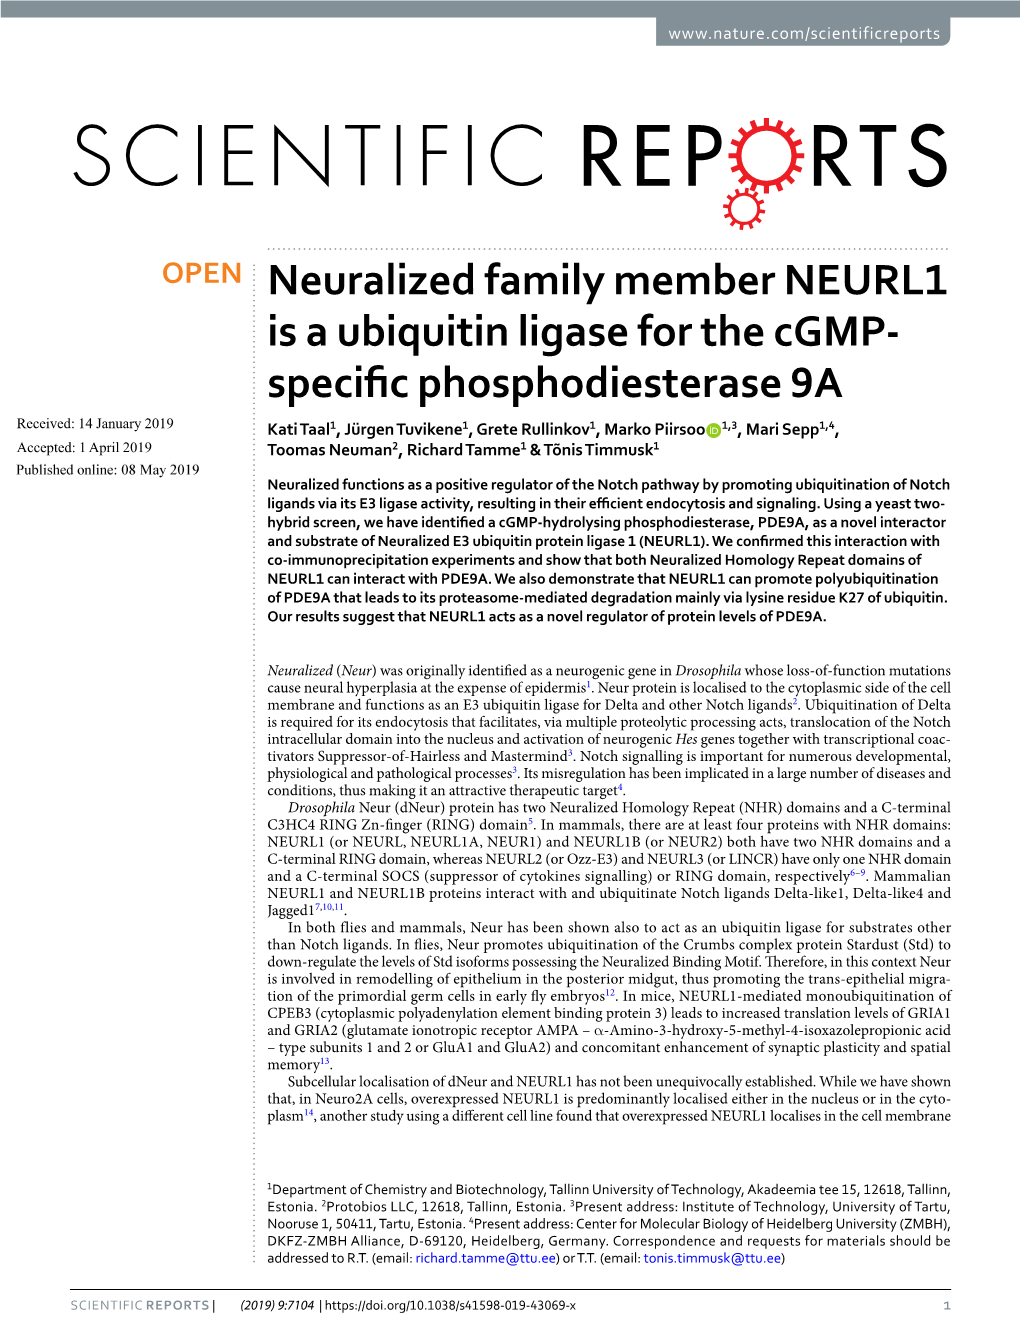 Neuralized Family Member NEURL1 Is a Ubiquitin Ligase for the Cgmp